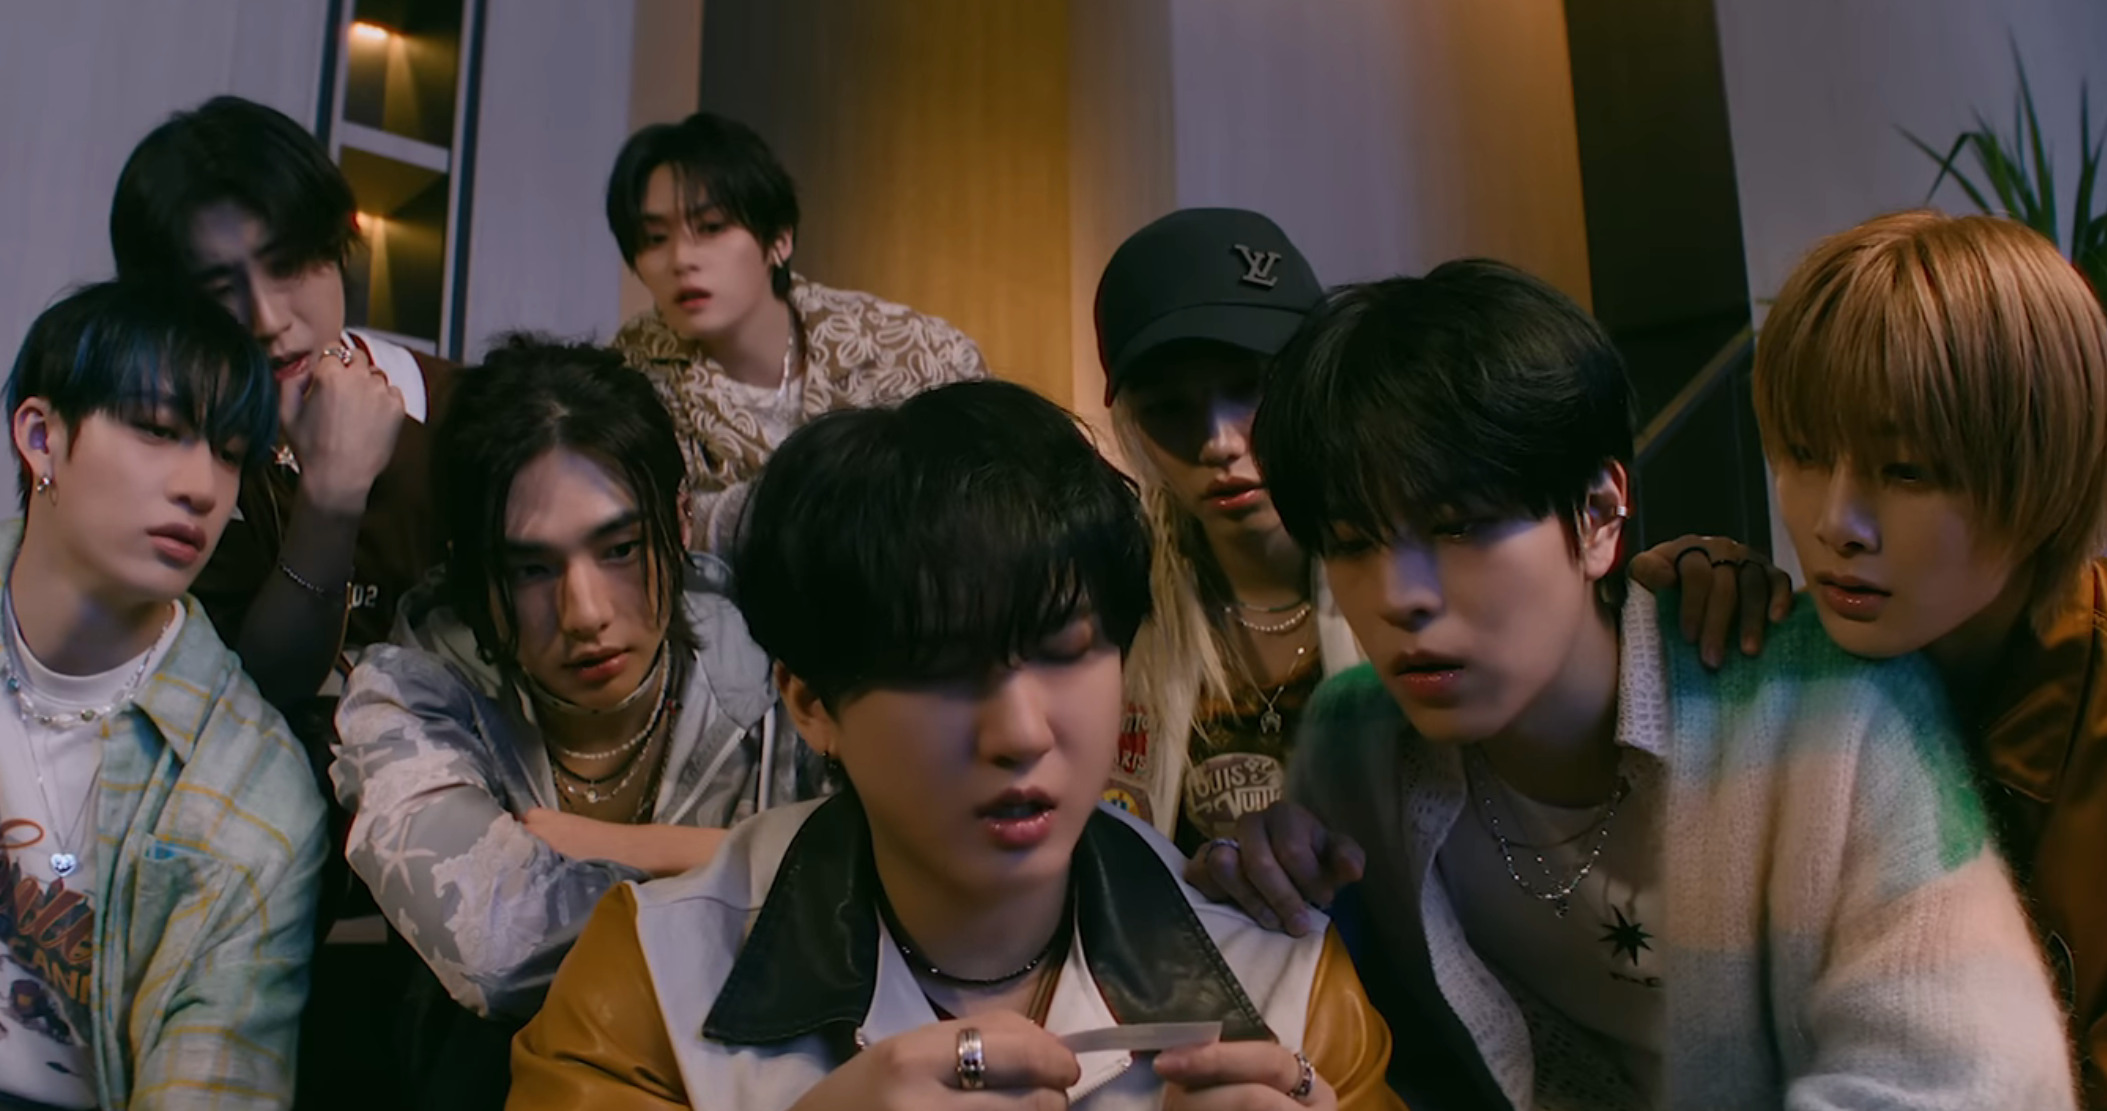 Stray Kids checks a phone message about their album release